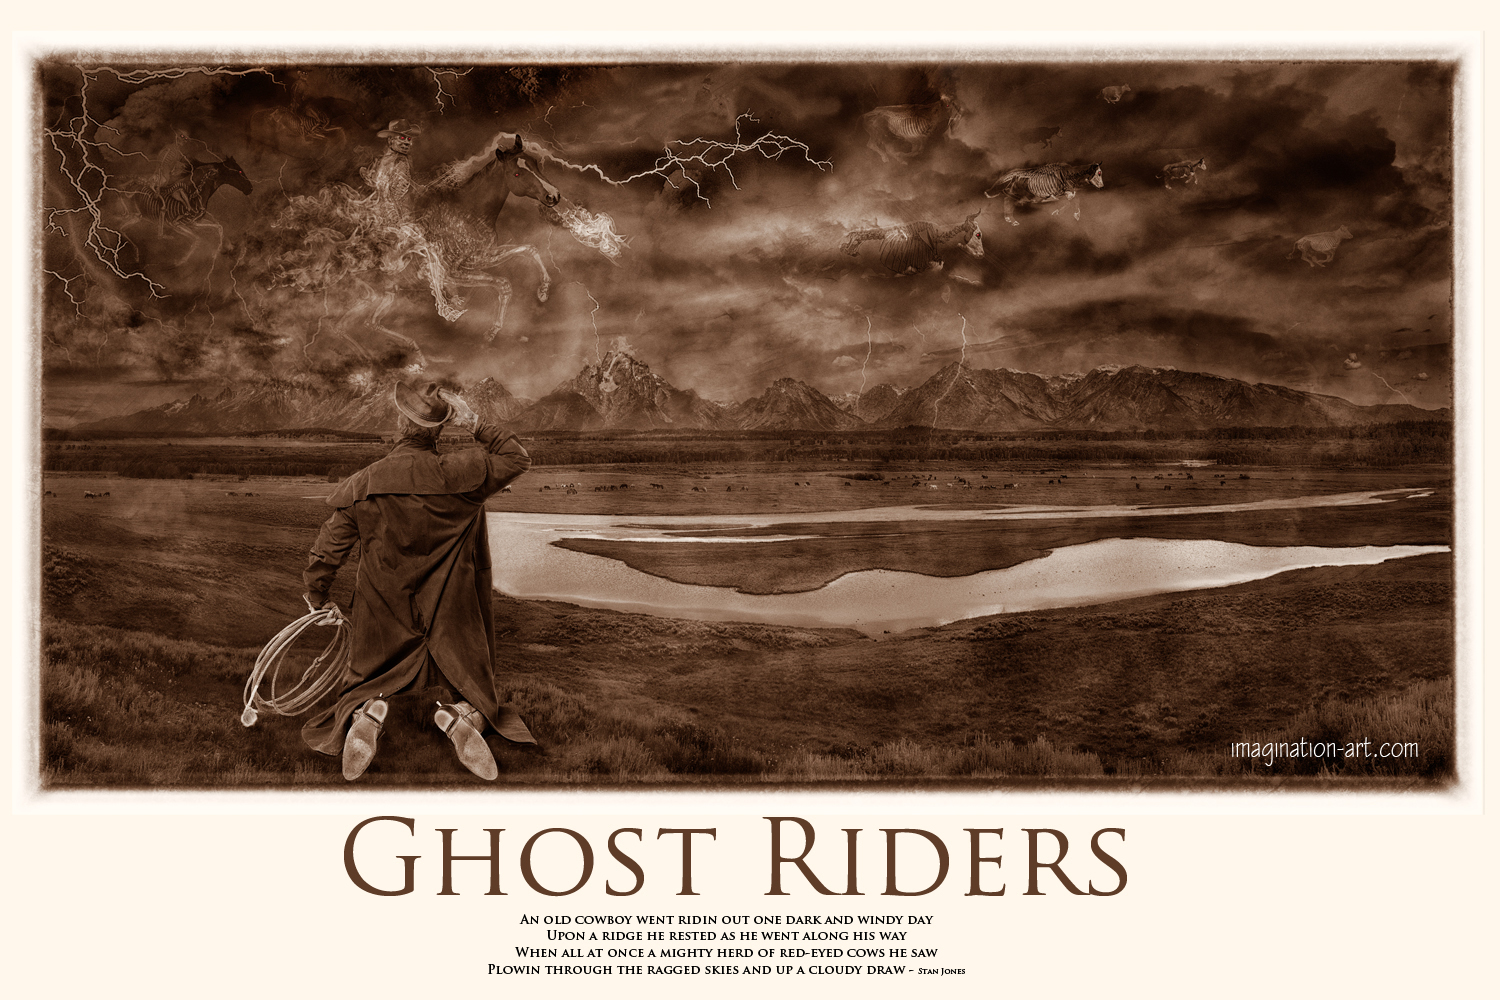 Ghost Riders in the Sky